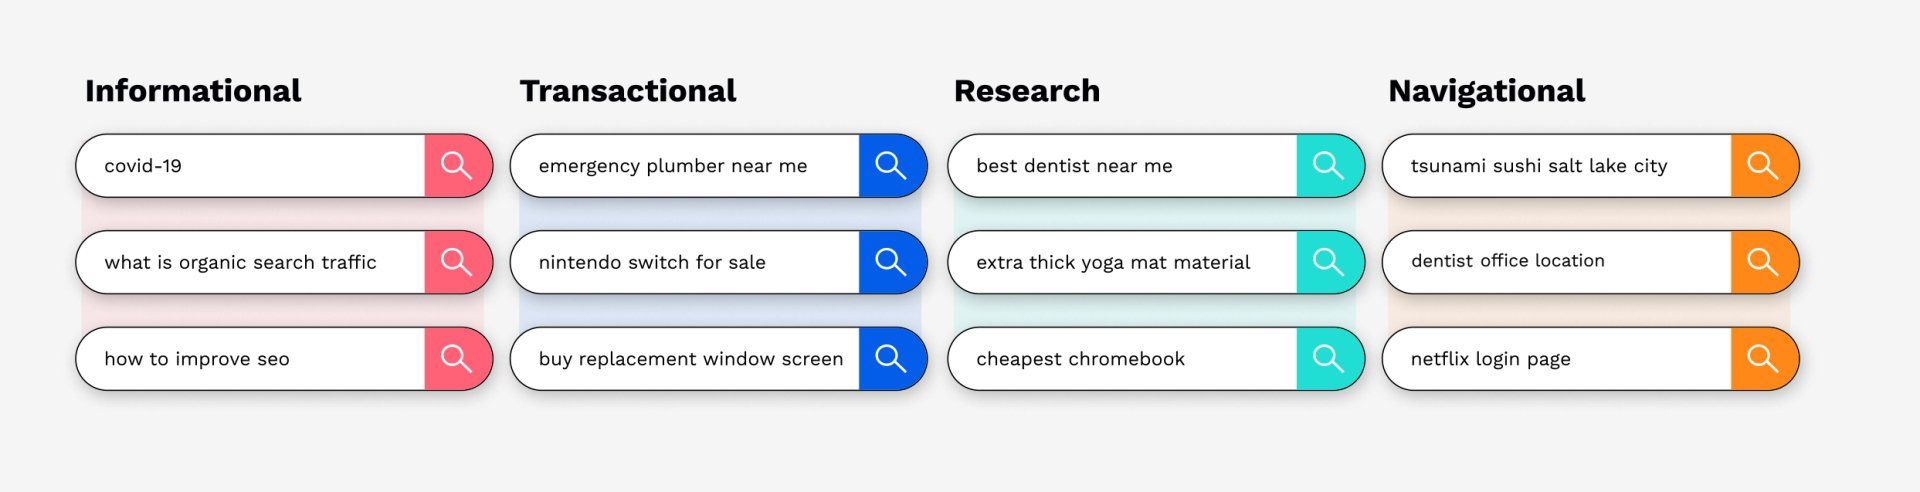 4 core intents when it comes to organic search